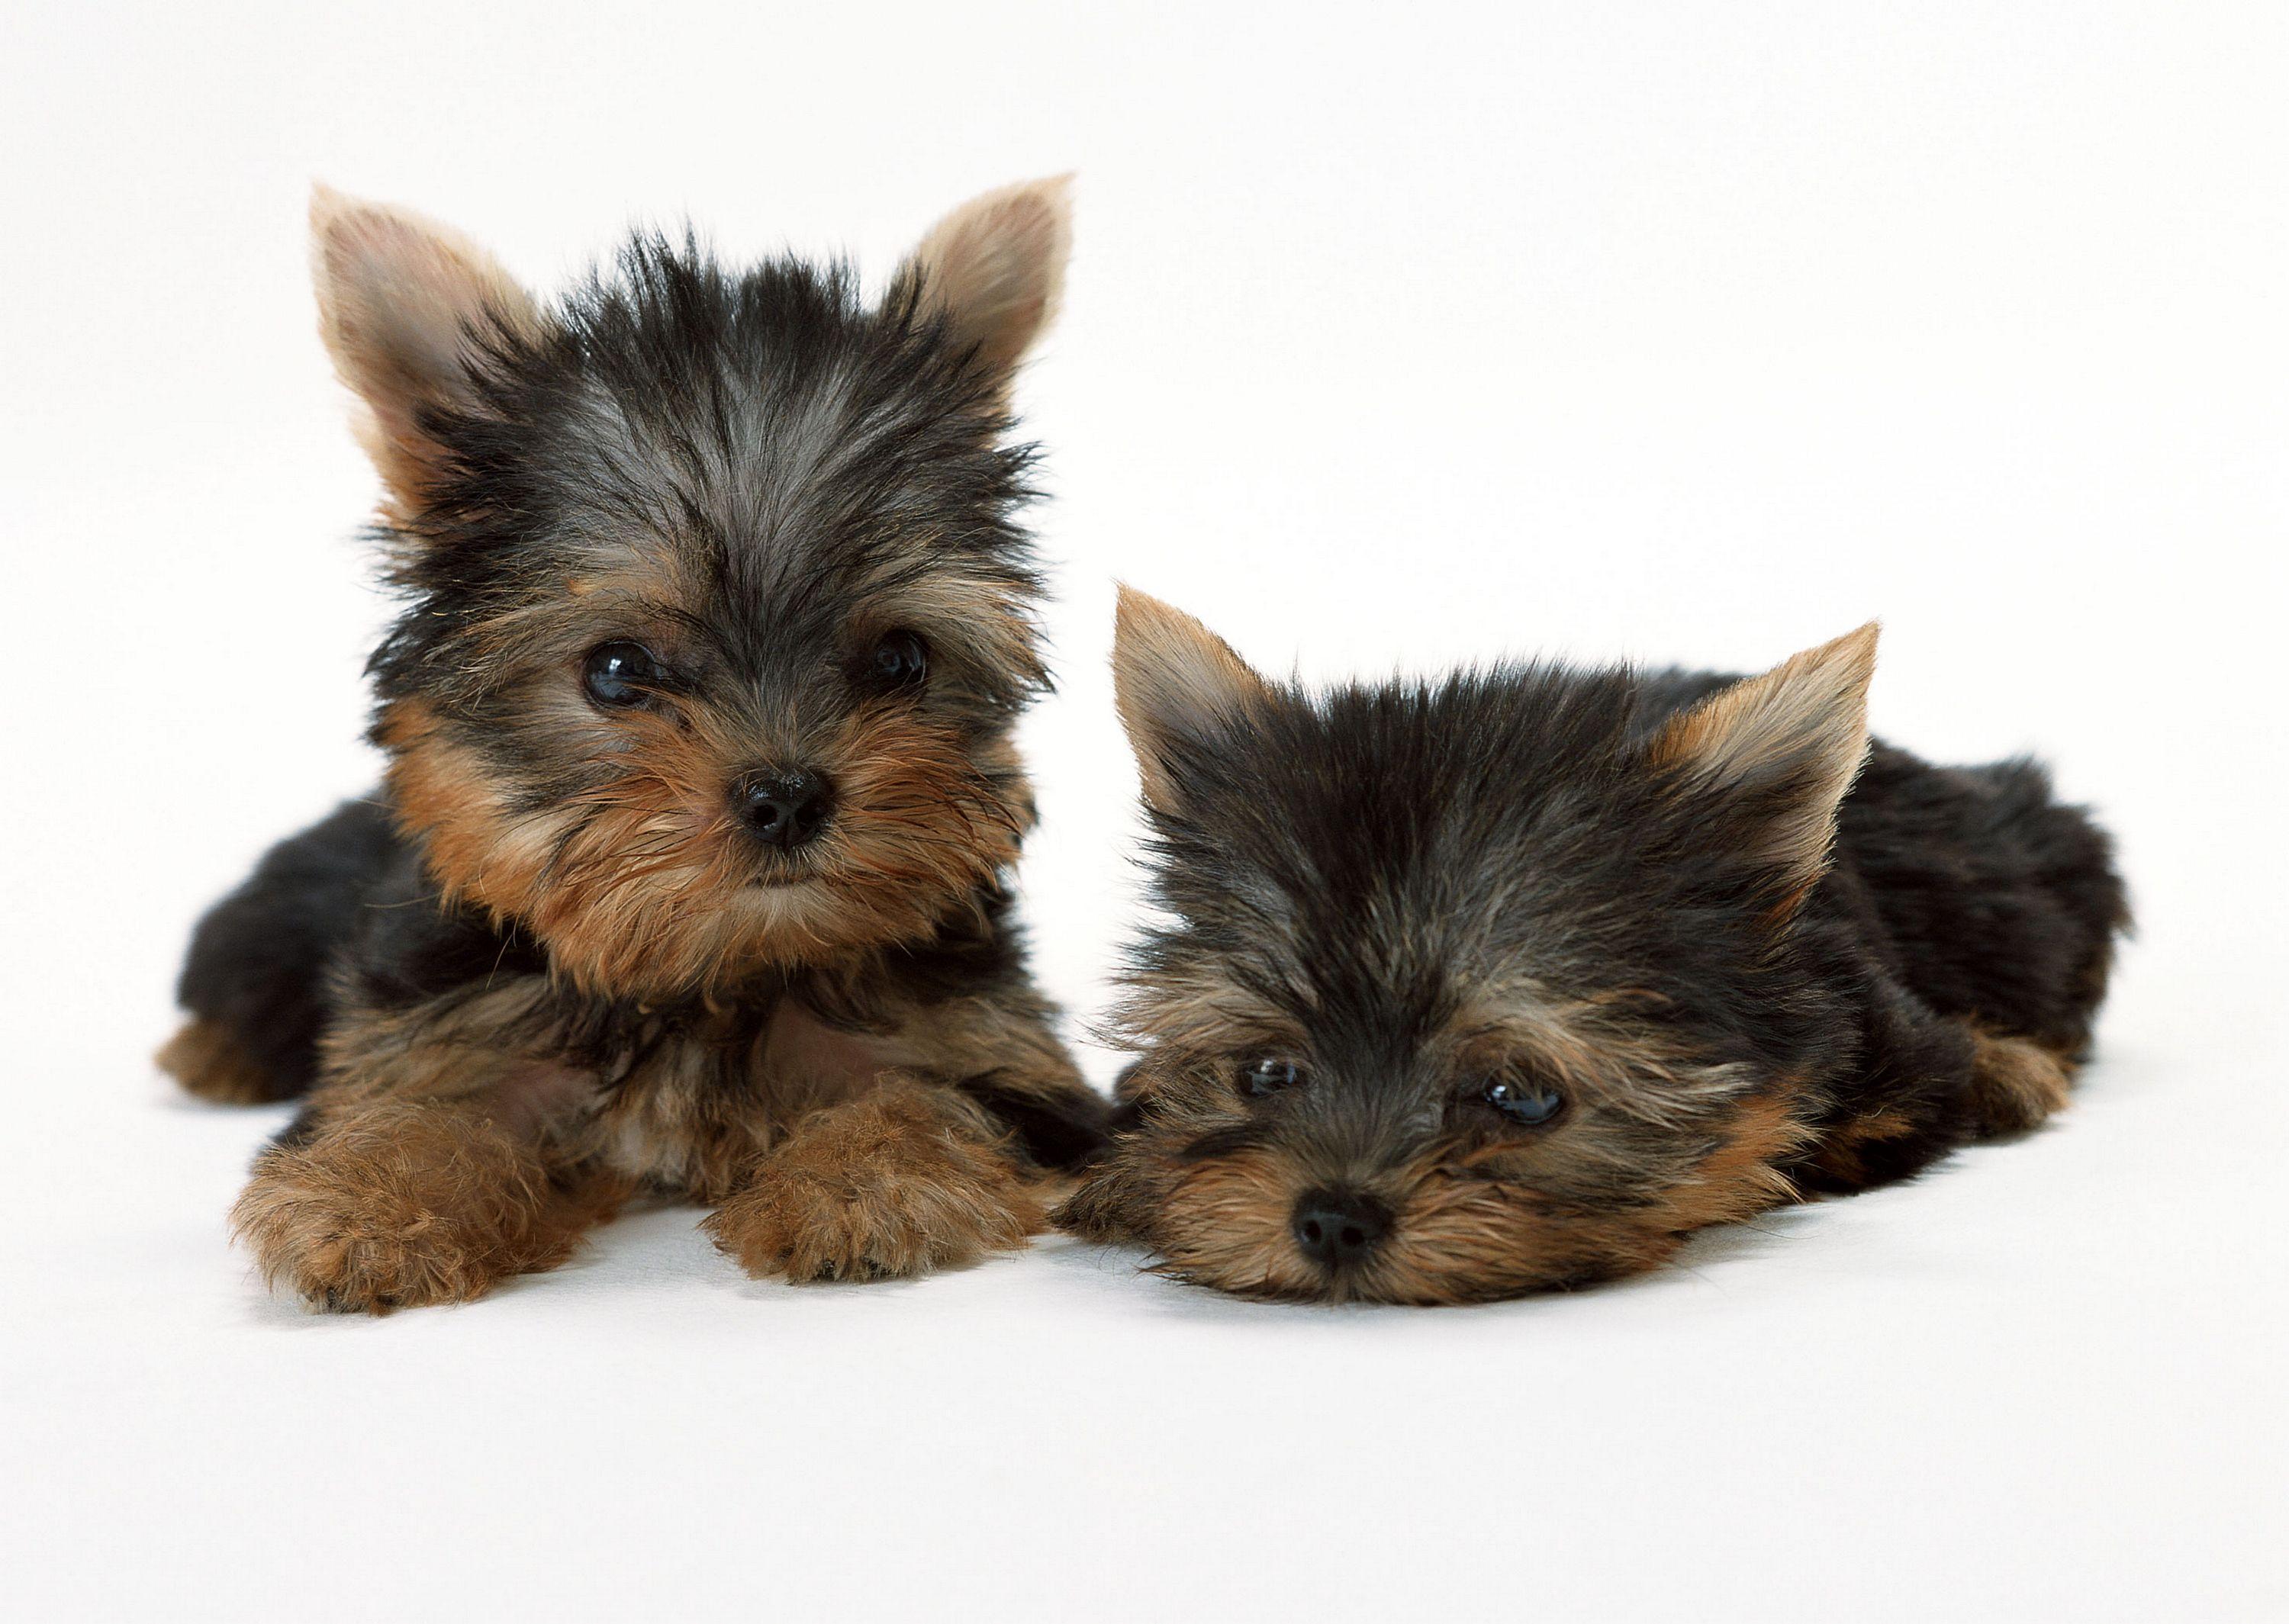 Toy Yorkies, cuddly, Cute, puppies, Yorkshire. Dog